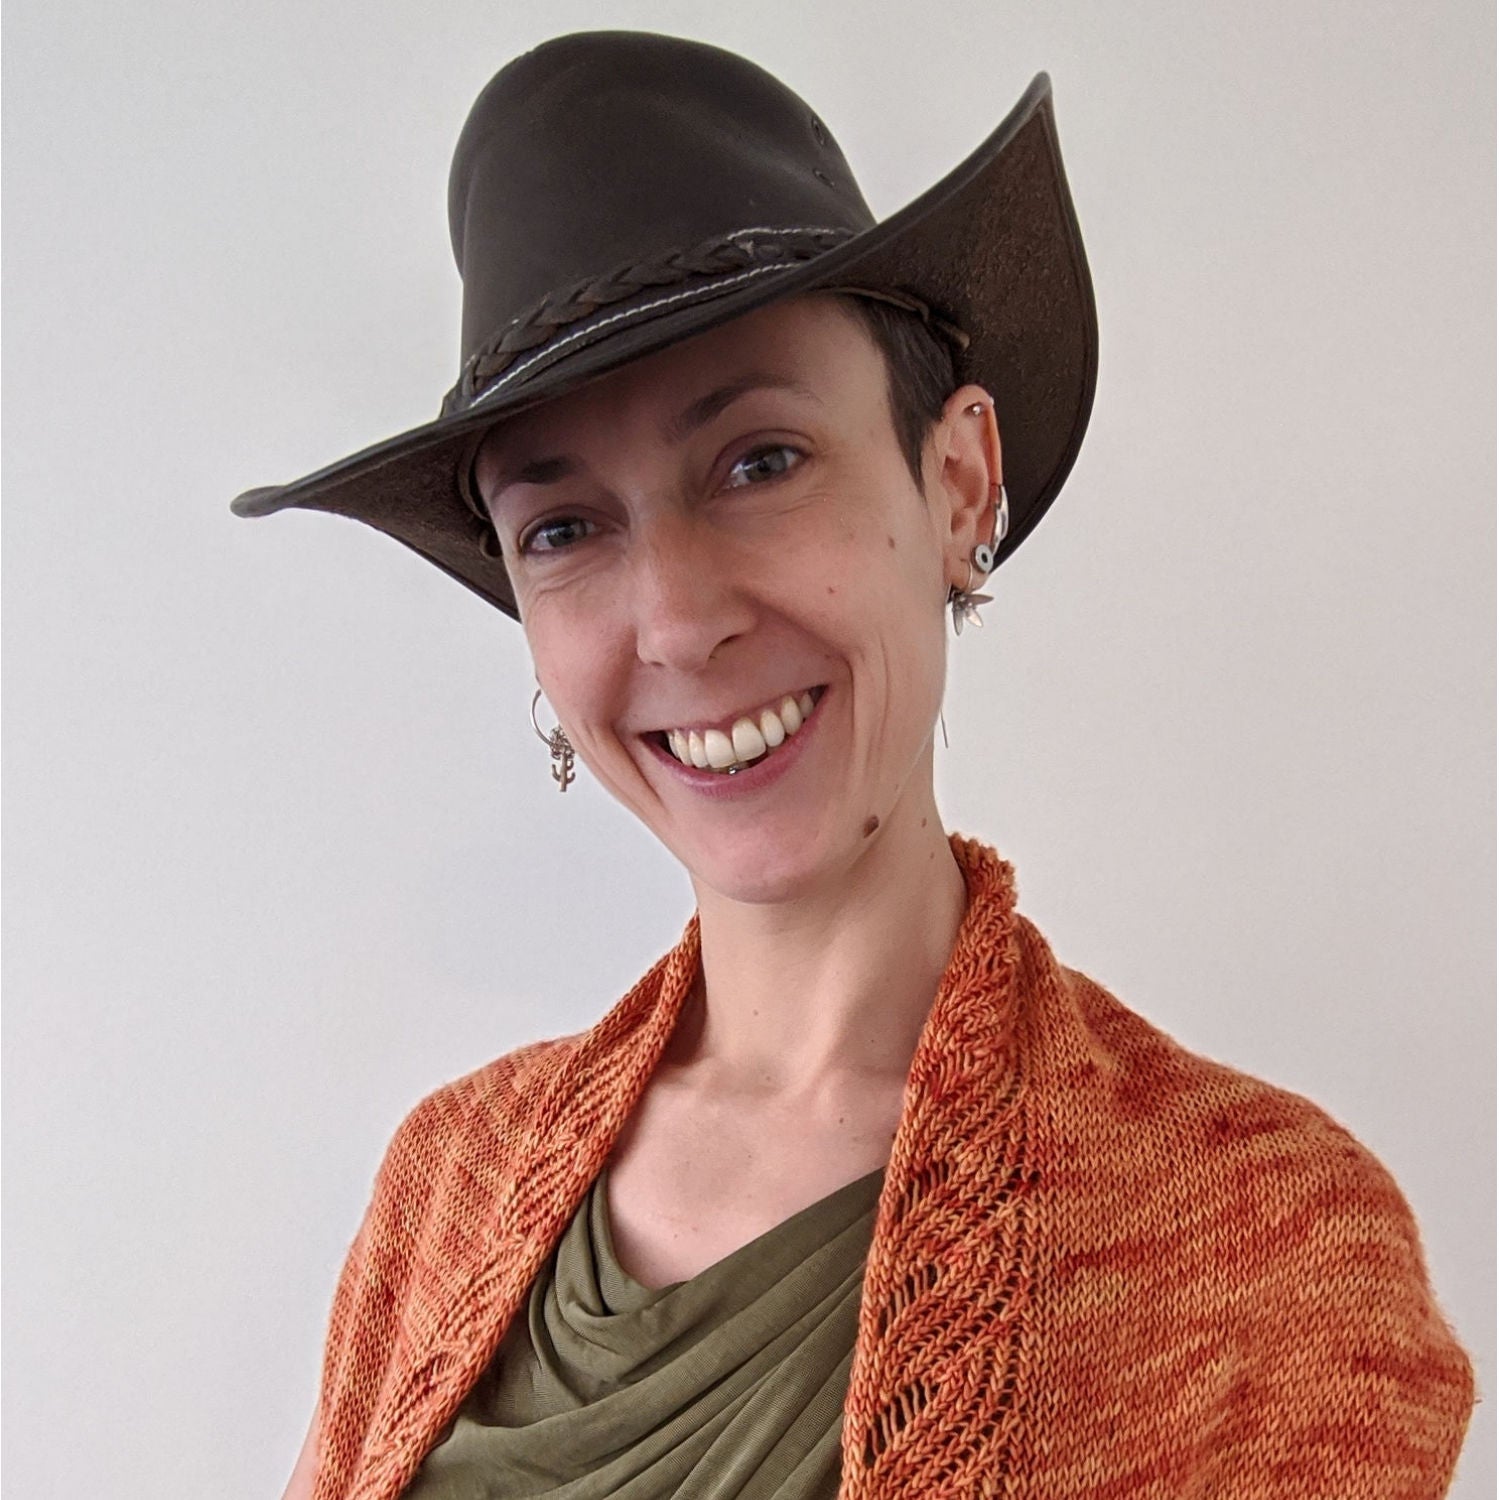 Person wearing cowboy hat and shawl